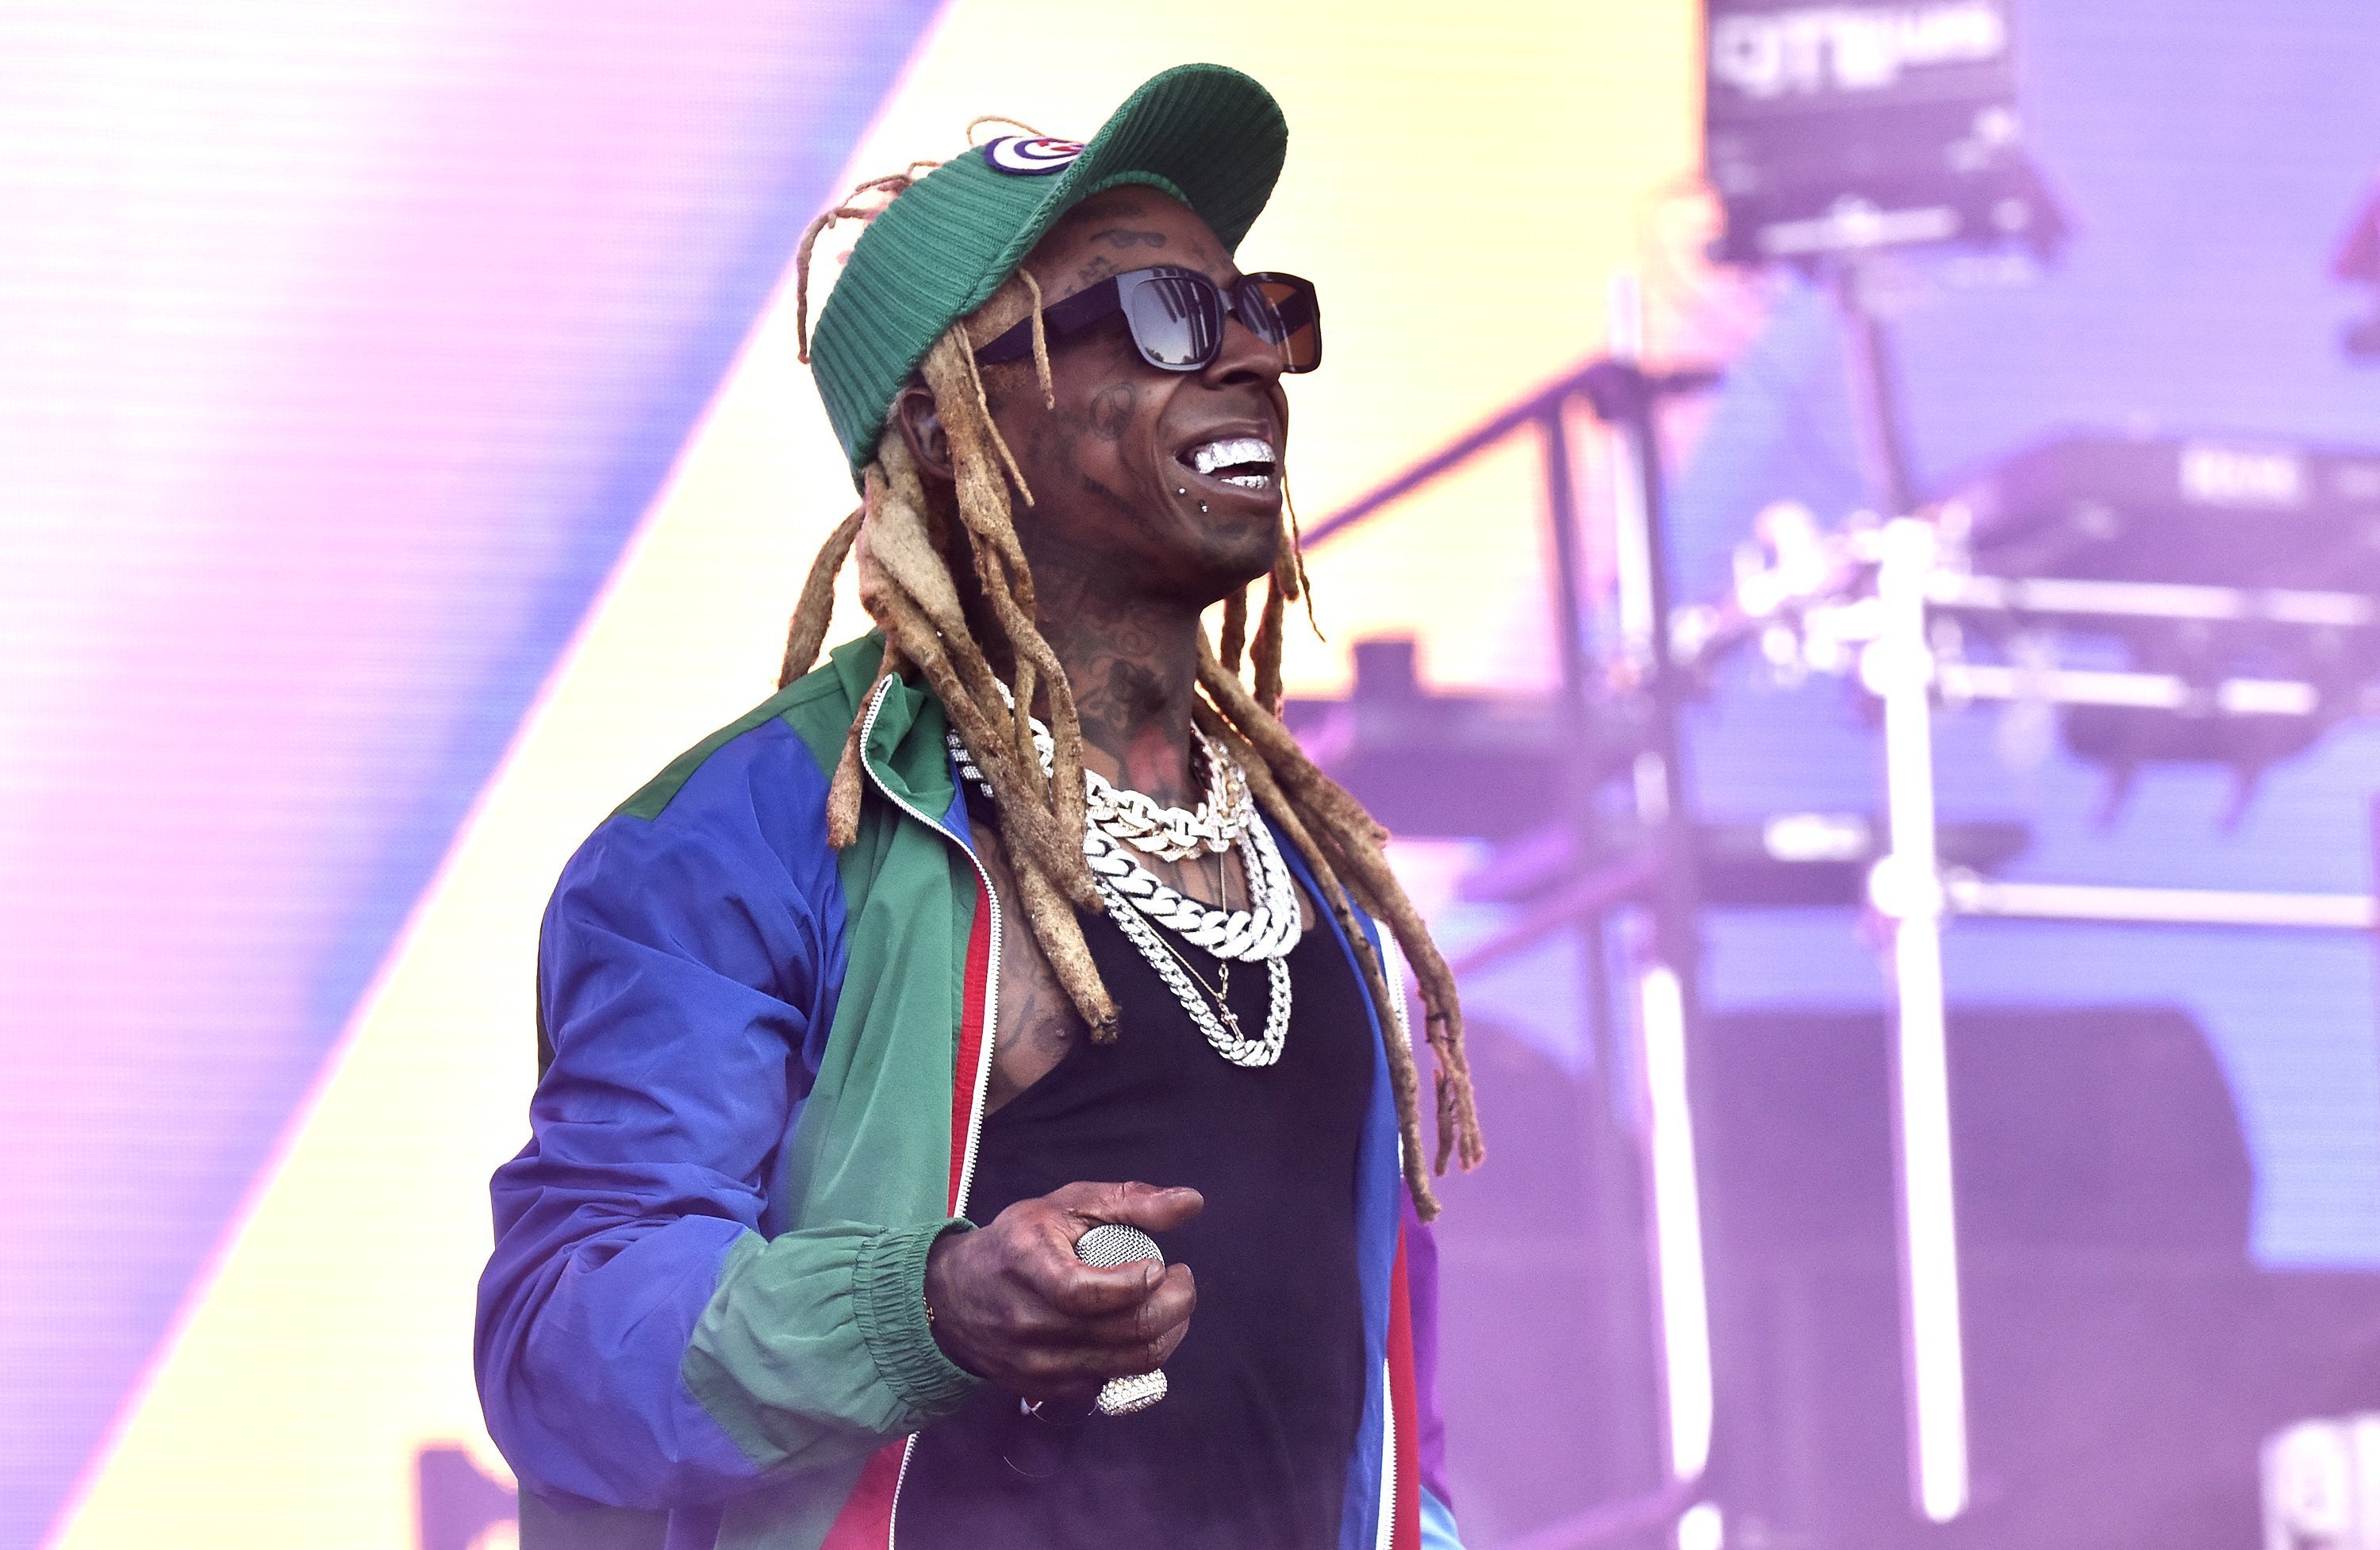  Lil Wayne performs during the 2019 Outside Lands music festival at Golden Gate Park on August 9, 2019 |Photo: Getty Images